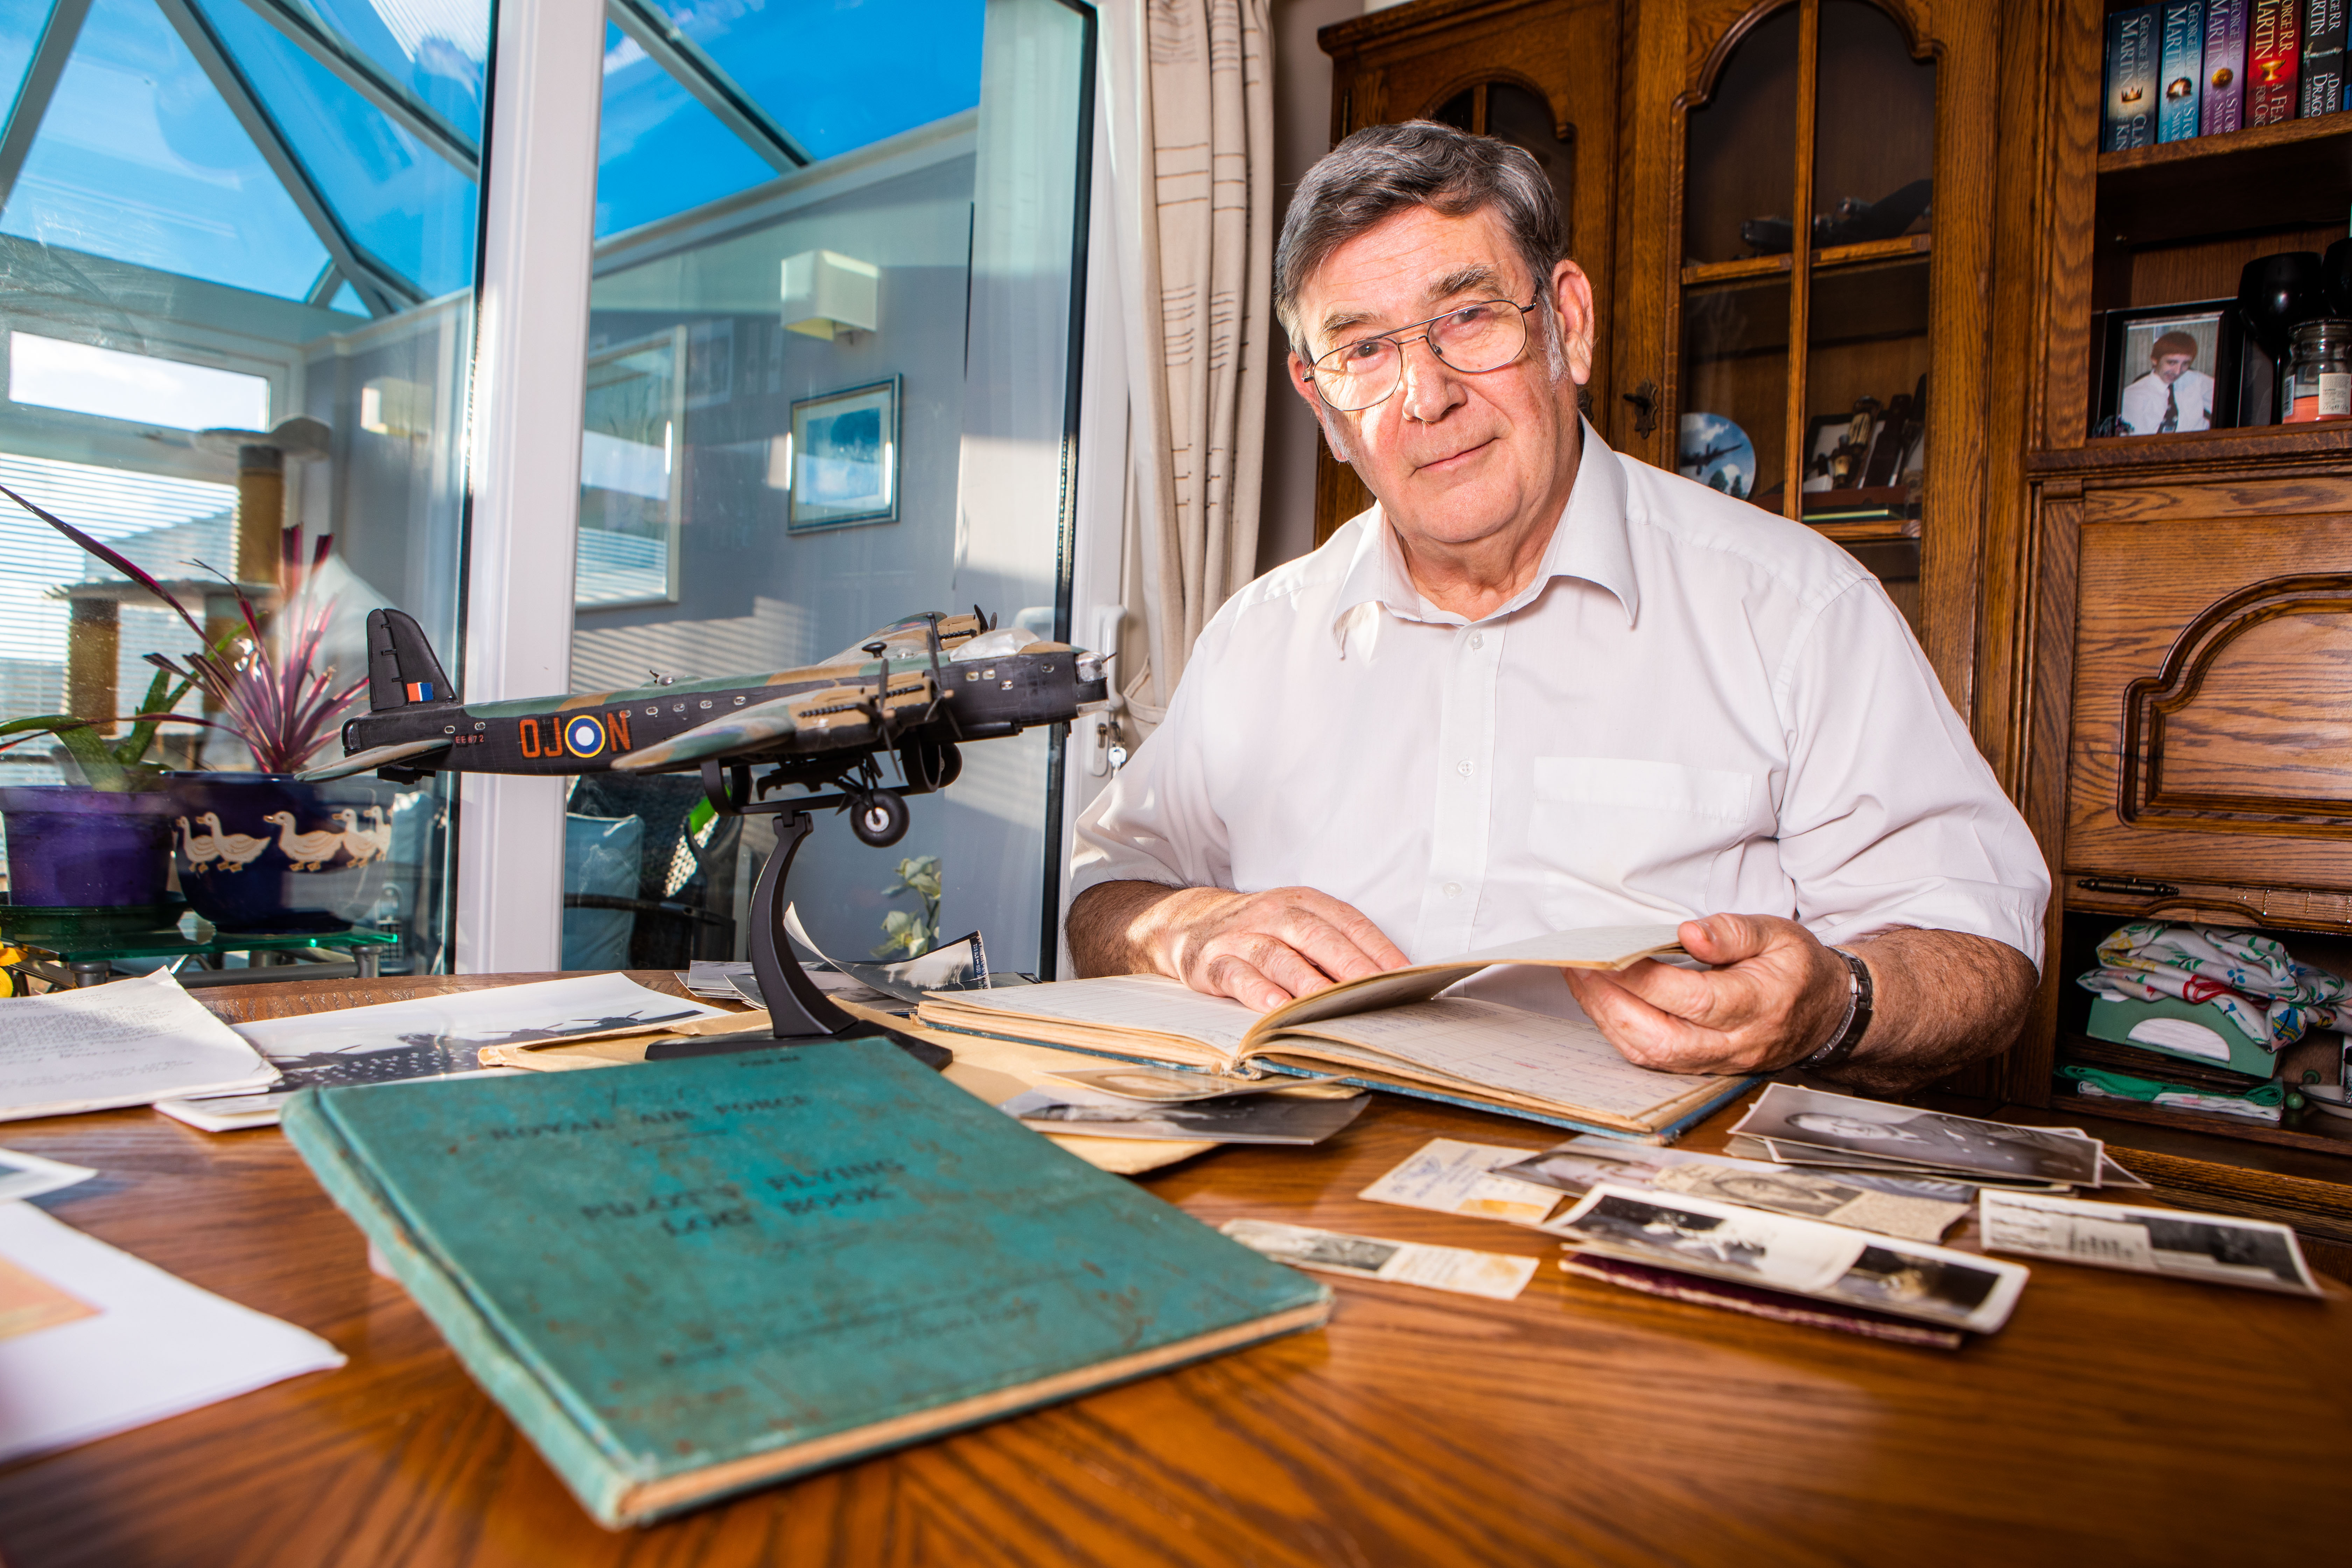 Alan Fraser looks through pictures and official documents in relation to his uncle's RAF service during World War Two.